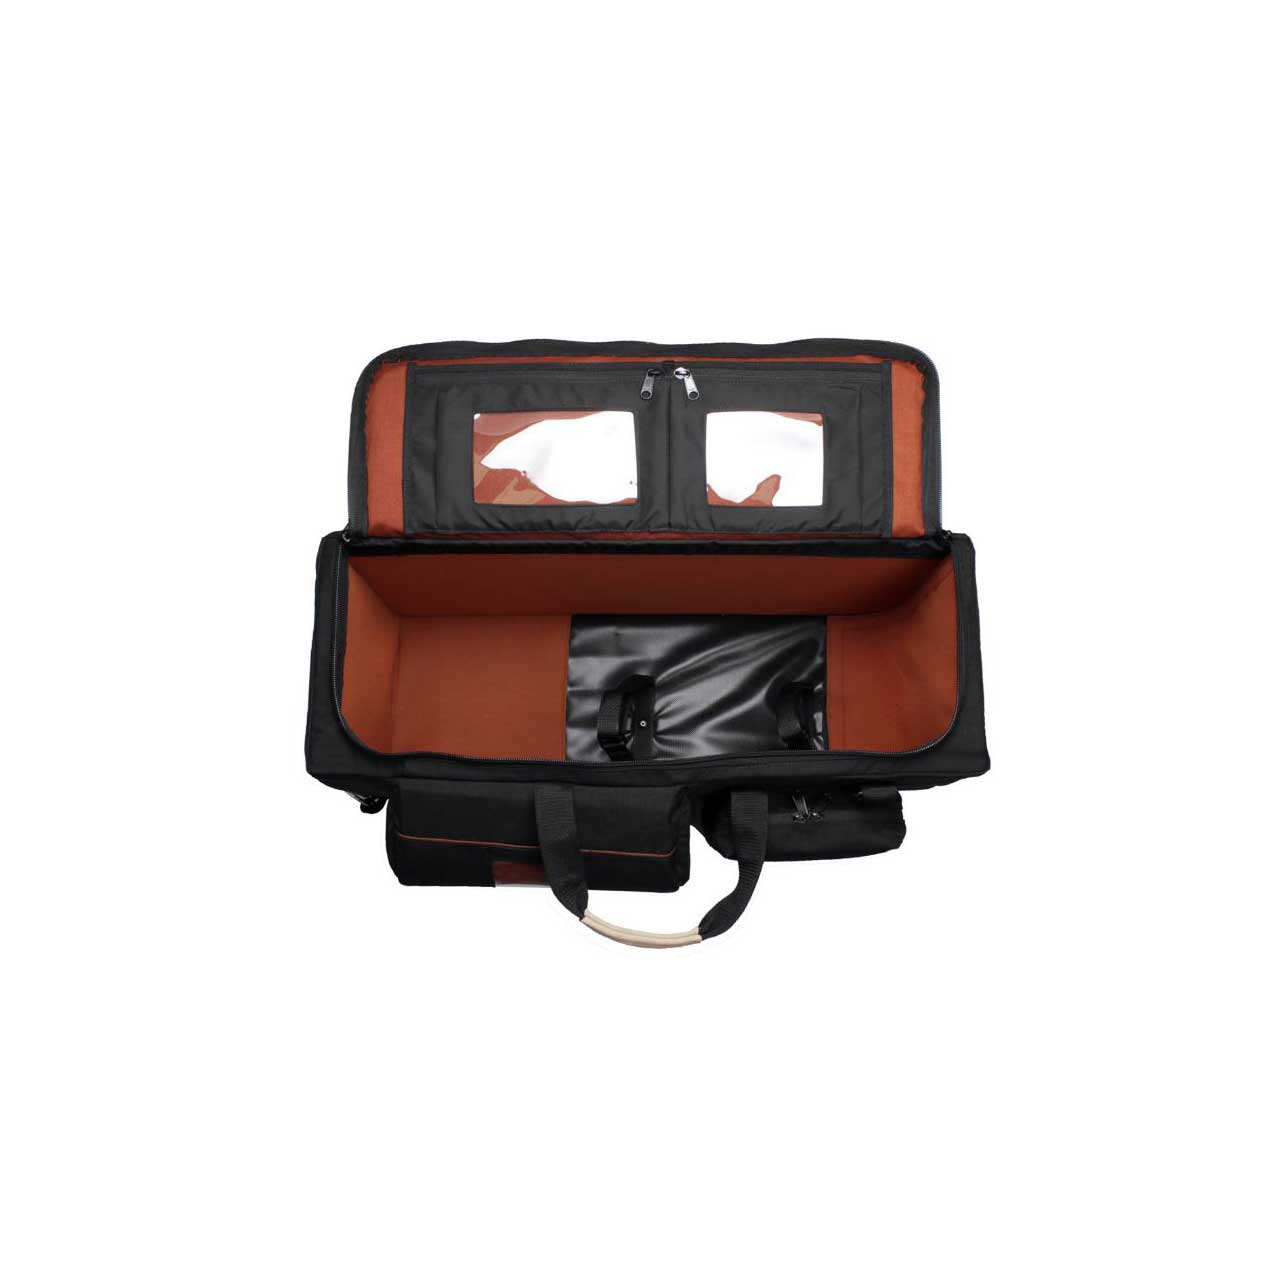 PortaBrace RIG-FS7ENGOR Rig Carrying Case - For the Sony PXW-FS7 with  Viewfinder Protection - Black